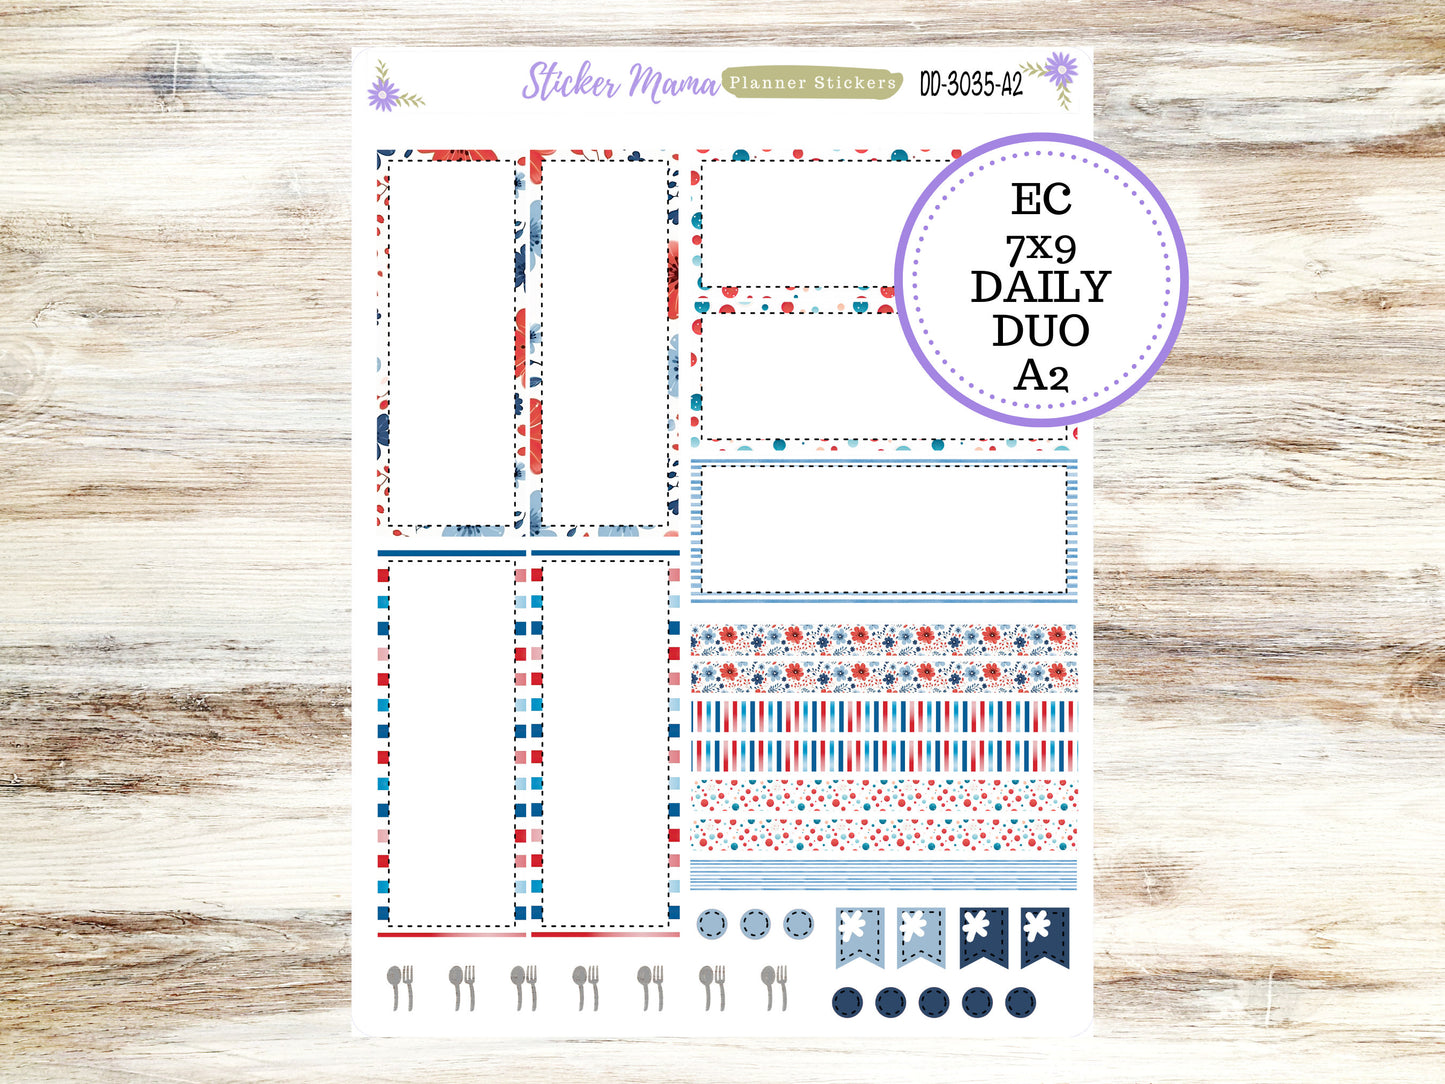 DAILY DUO 7x9-Kit #3035  || American Dream Kit  || Planner Stickers - Daily Duo 7x9 Planner - Daily Duo Stickers - Daily Planner